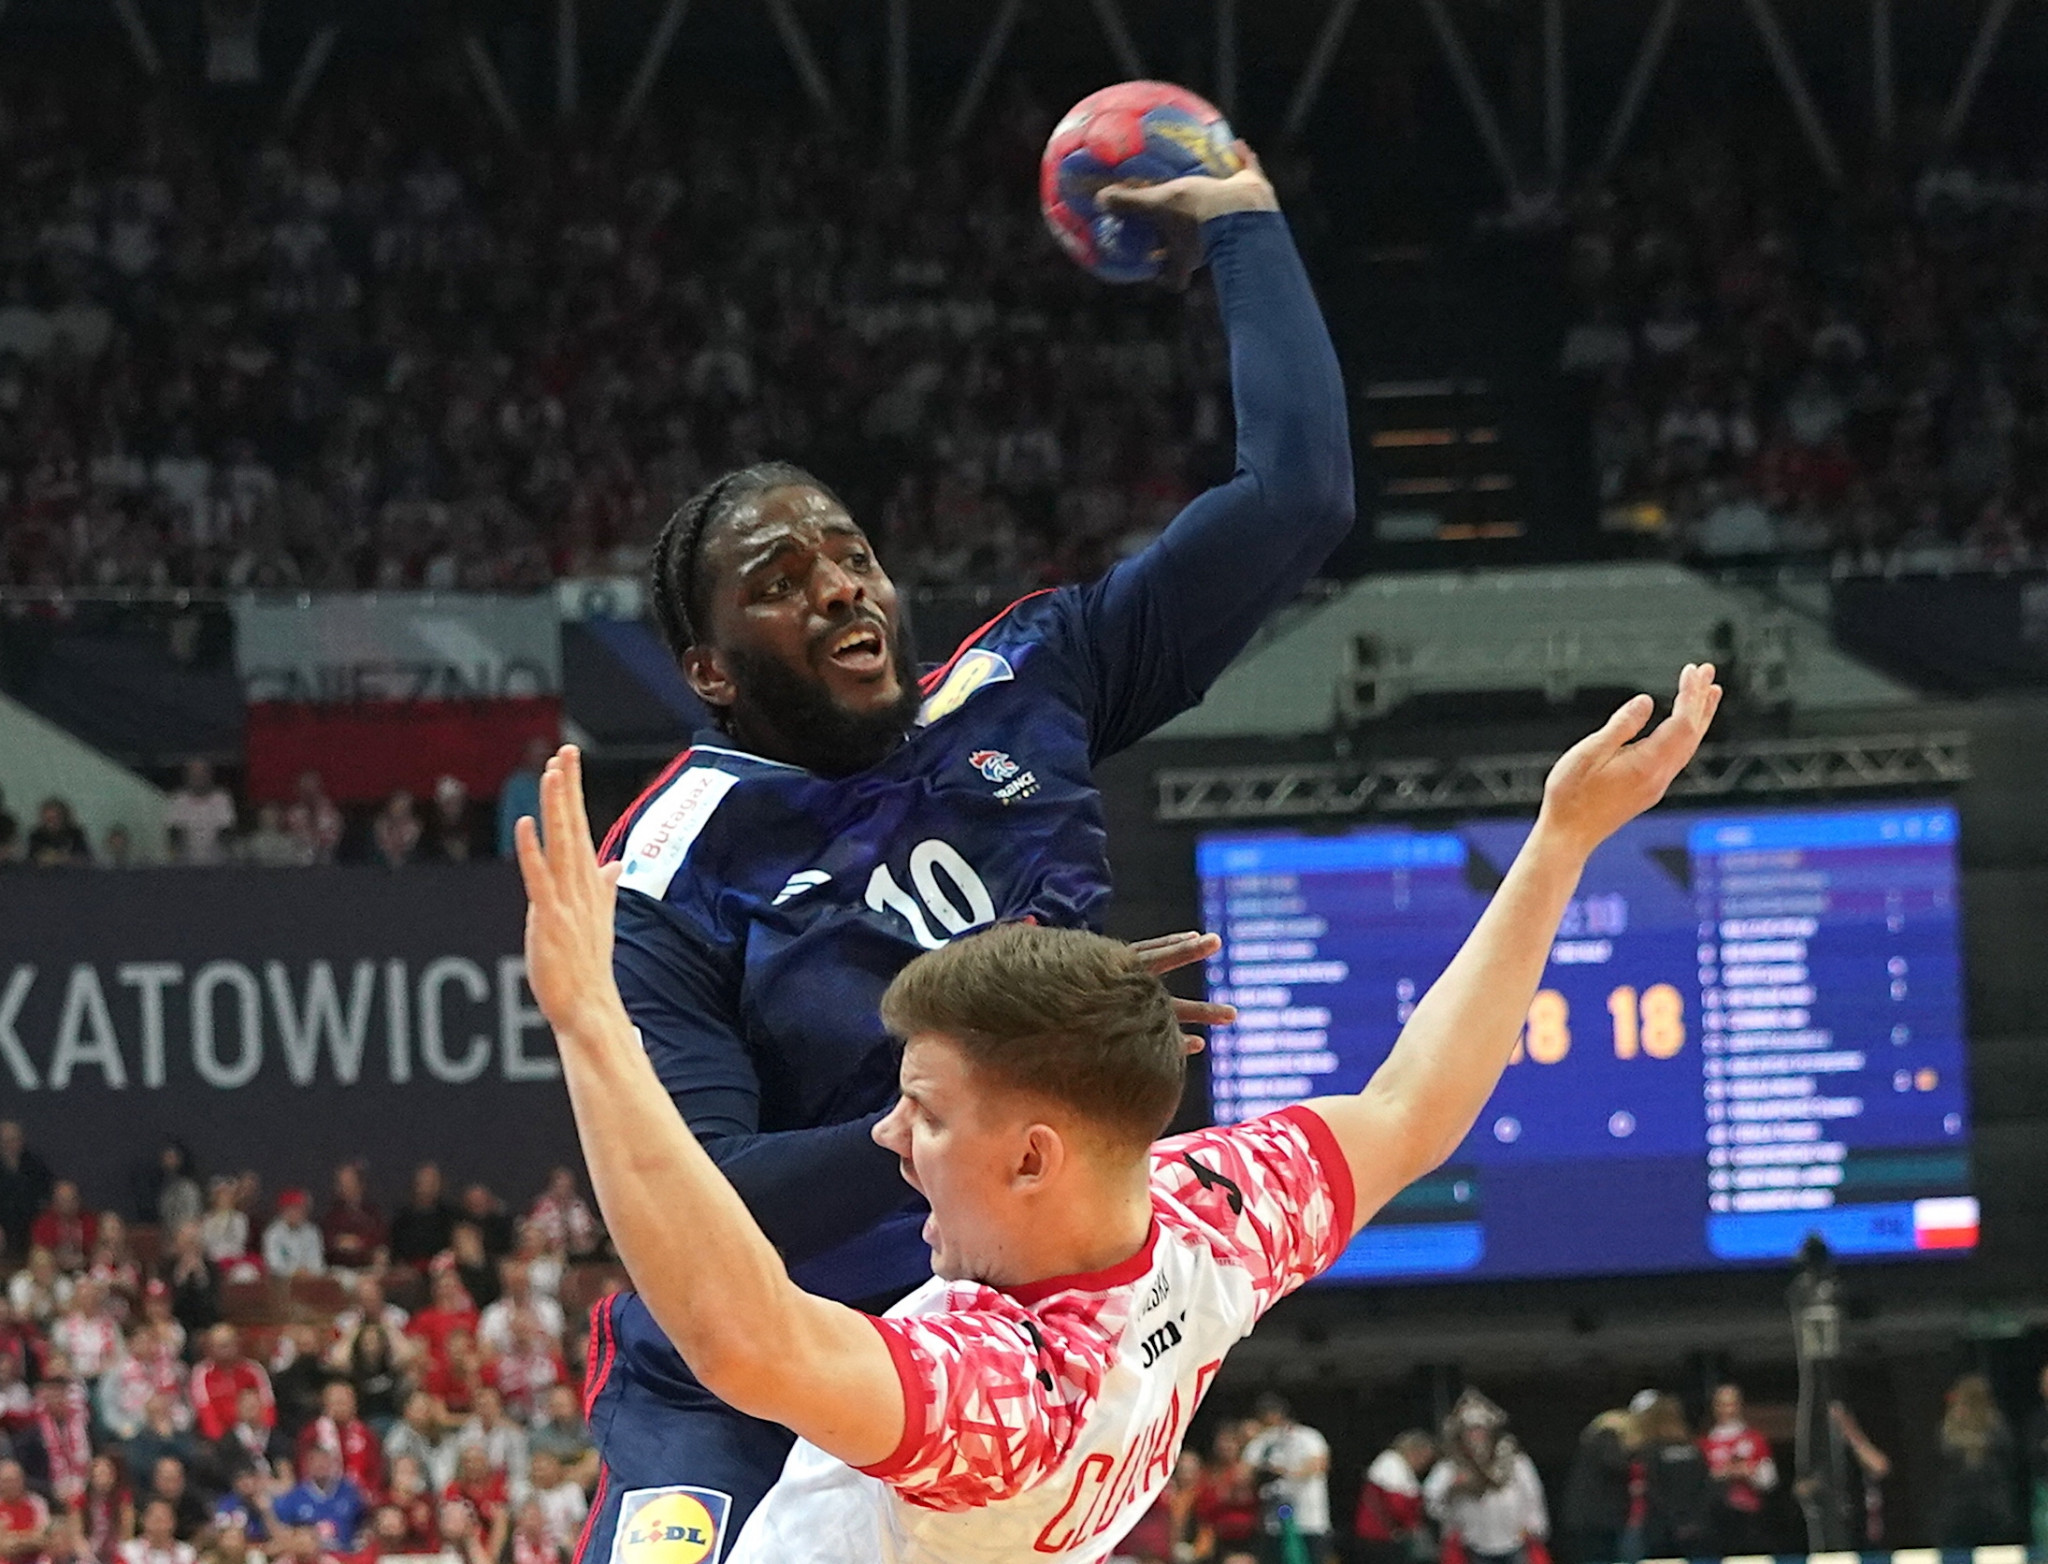 Olympic gold medallists France open IHF World Championship with victory over co-hosts Poland